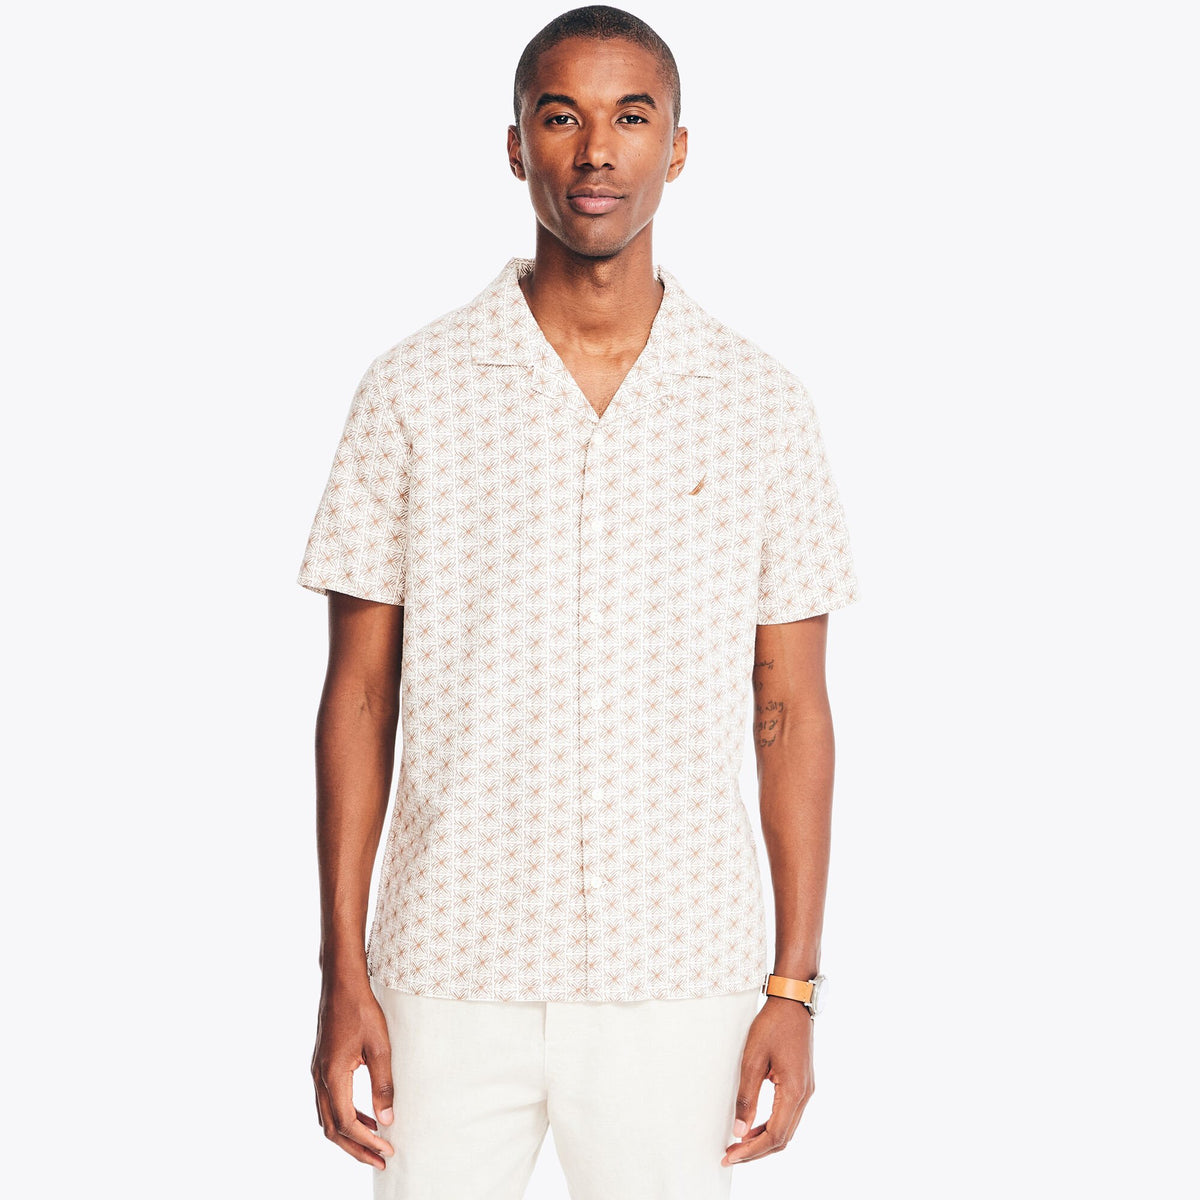 Nautica Men's Sustainably Crafted Printed Linen Short-Sleeve Shirt Sail White